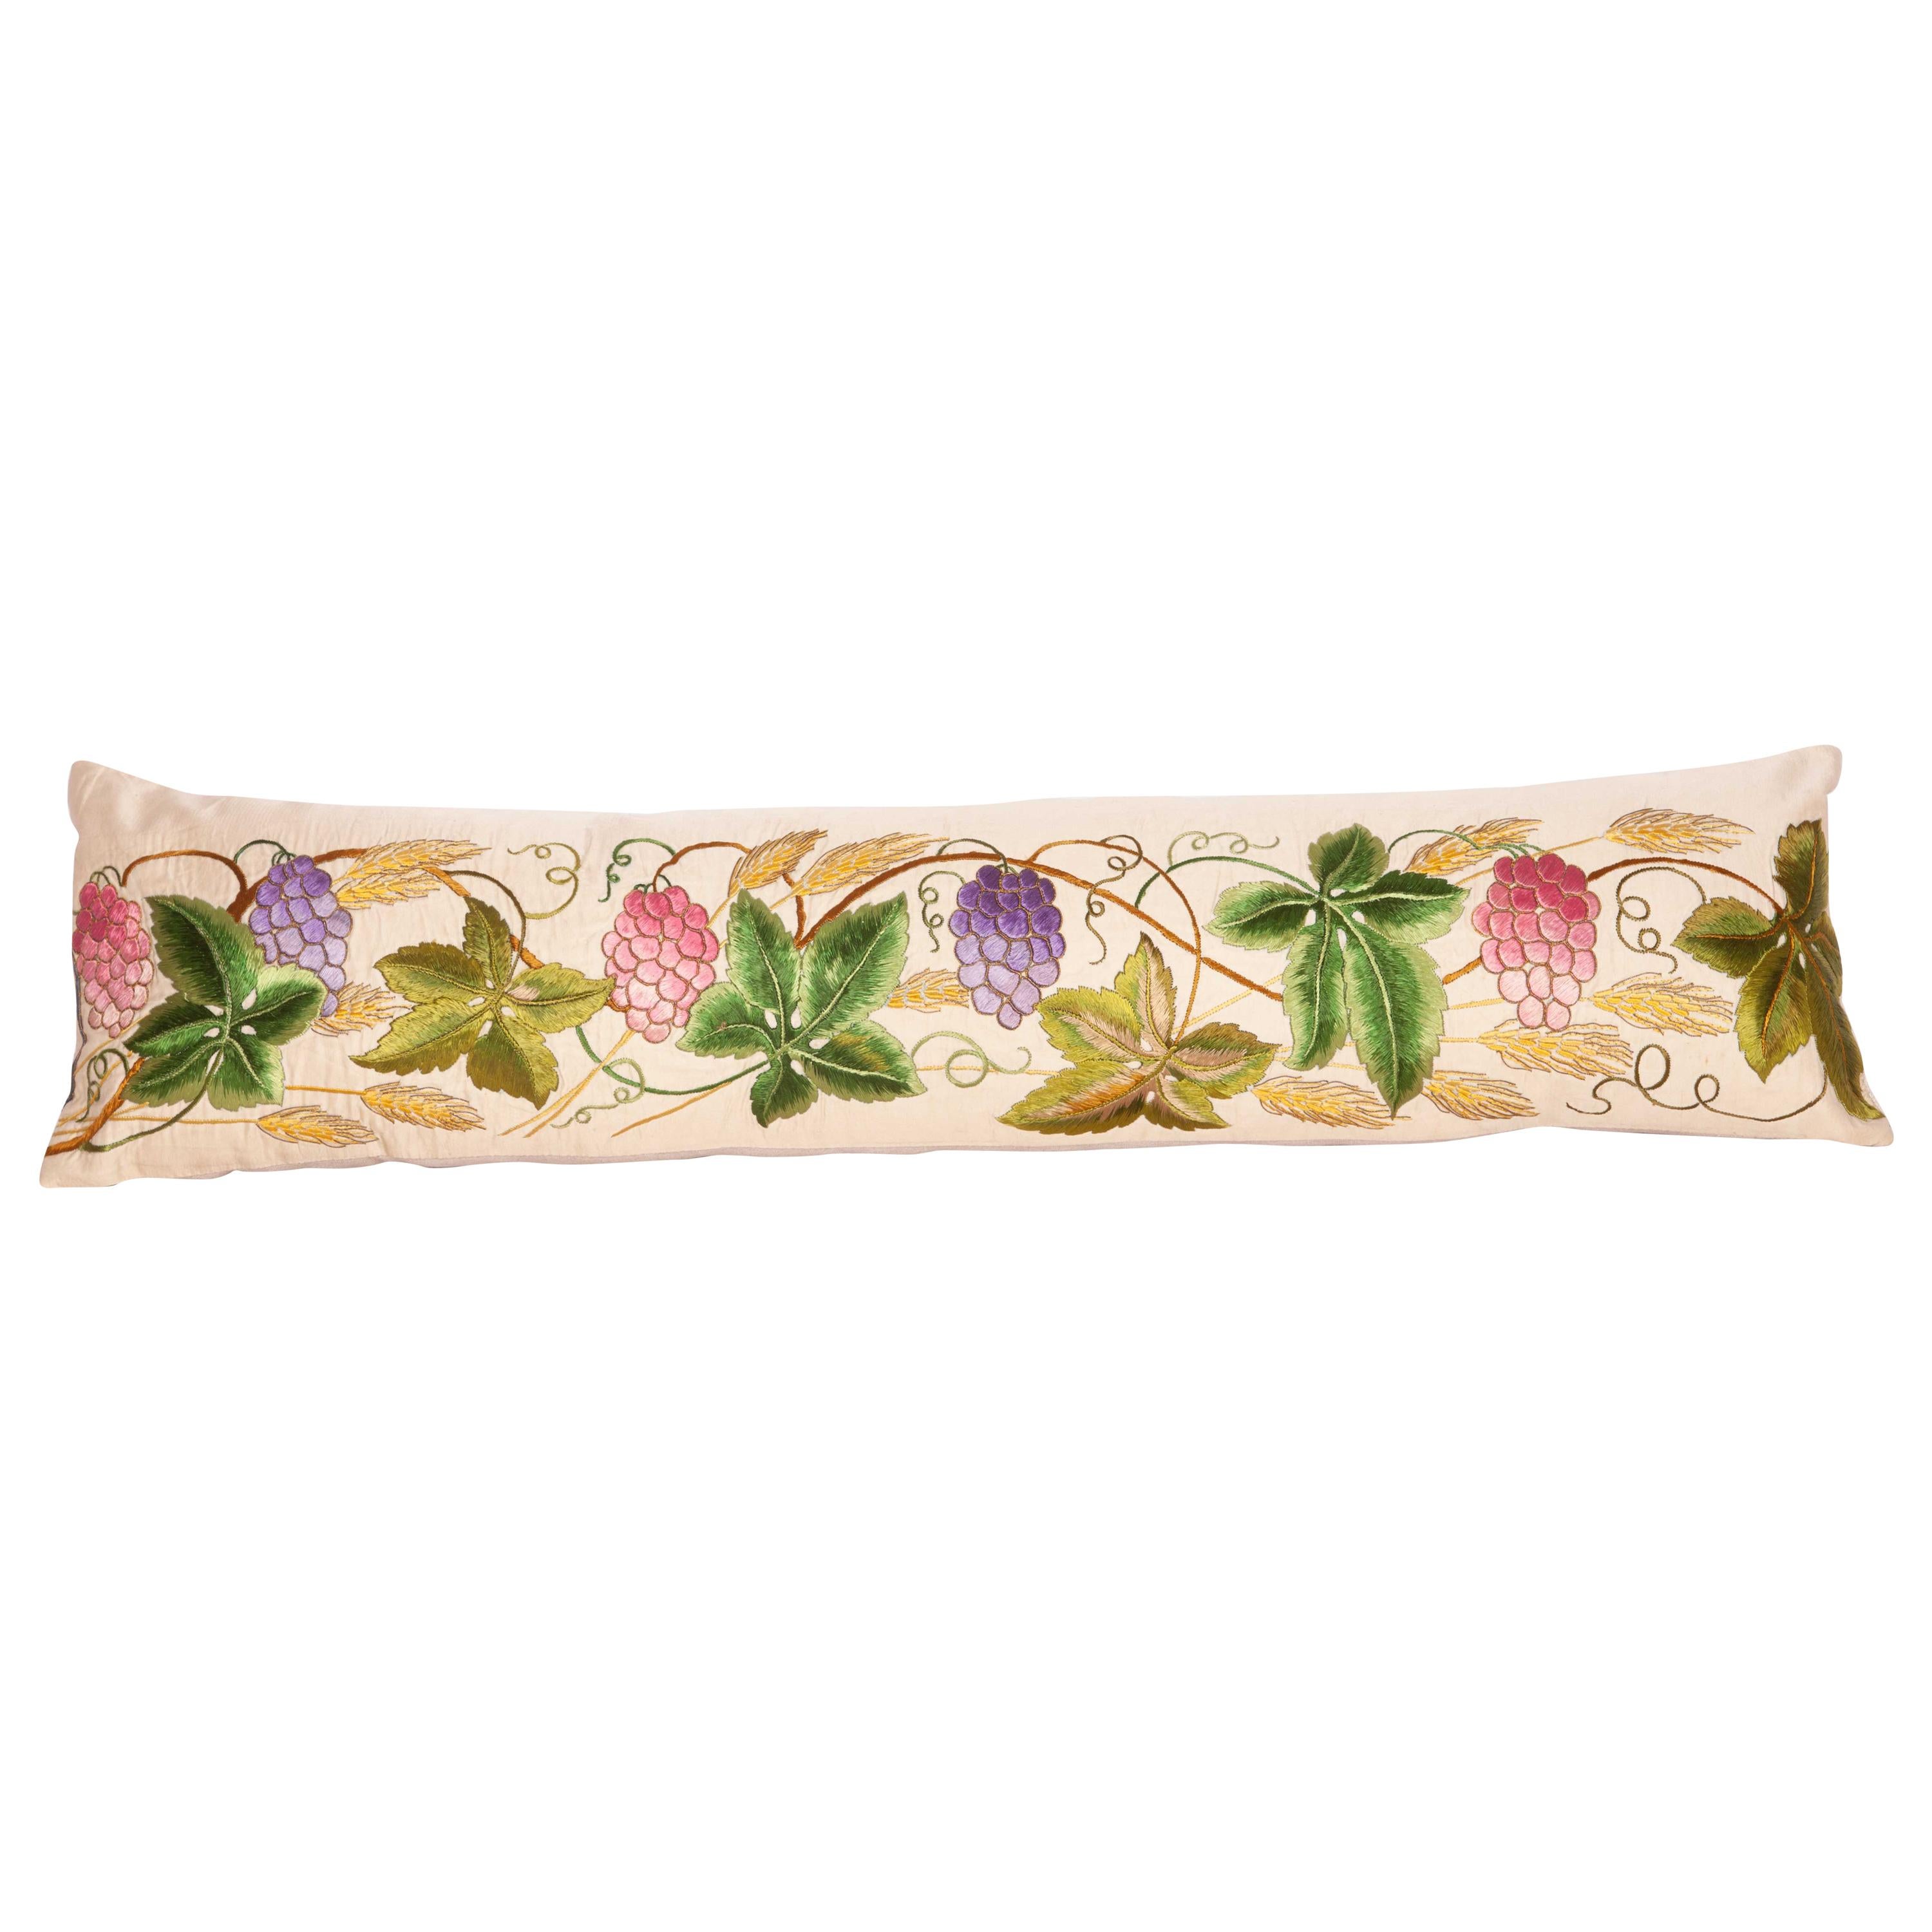 Antique Lumbar Pillow Case Made from an 18th-19th Century, European Embroidery For Sale